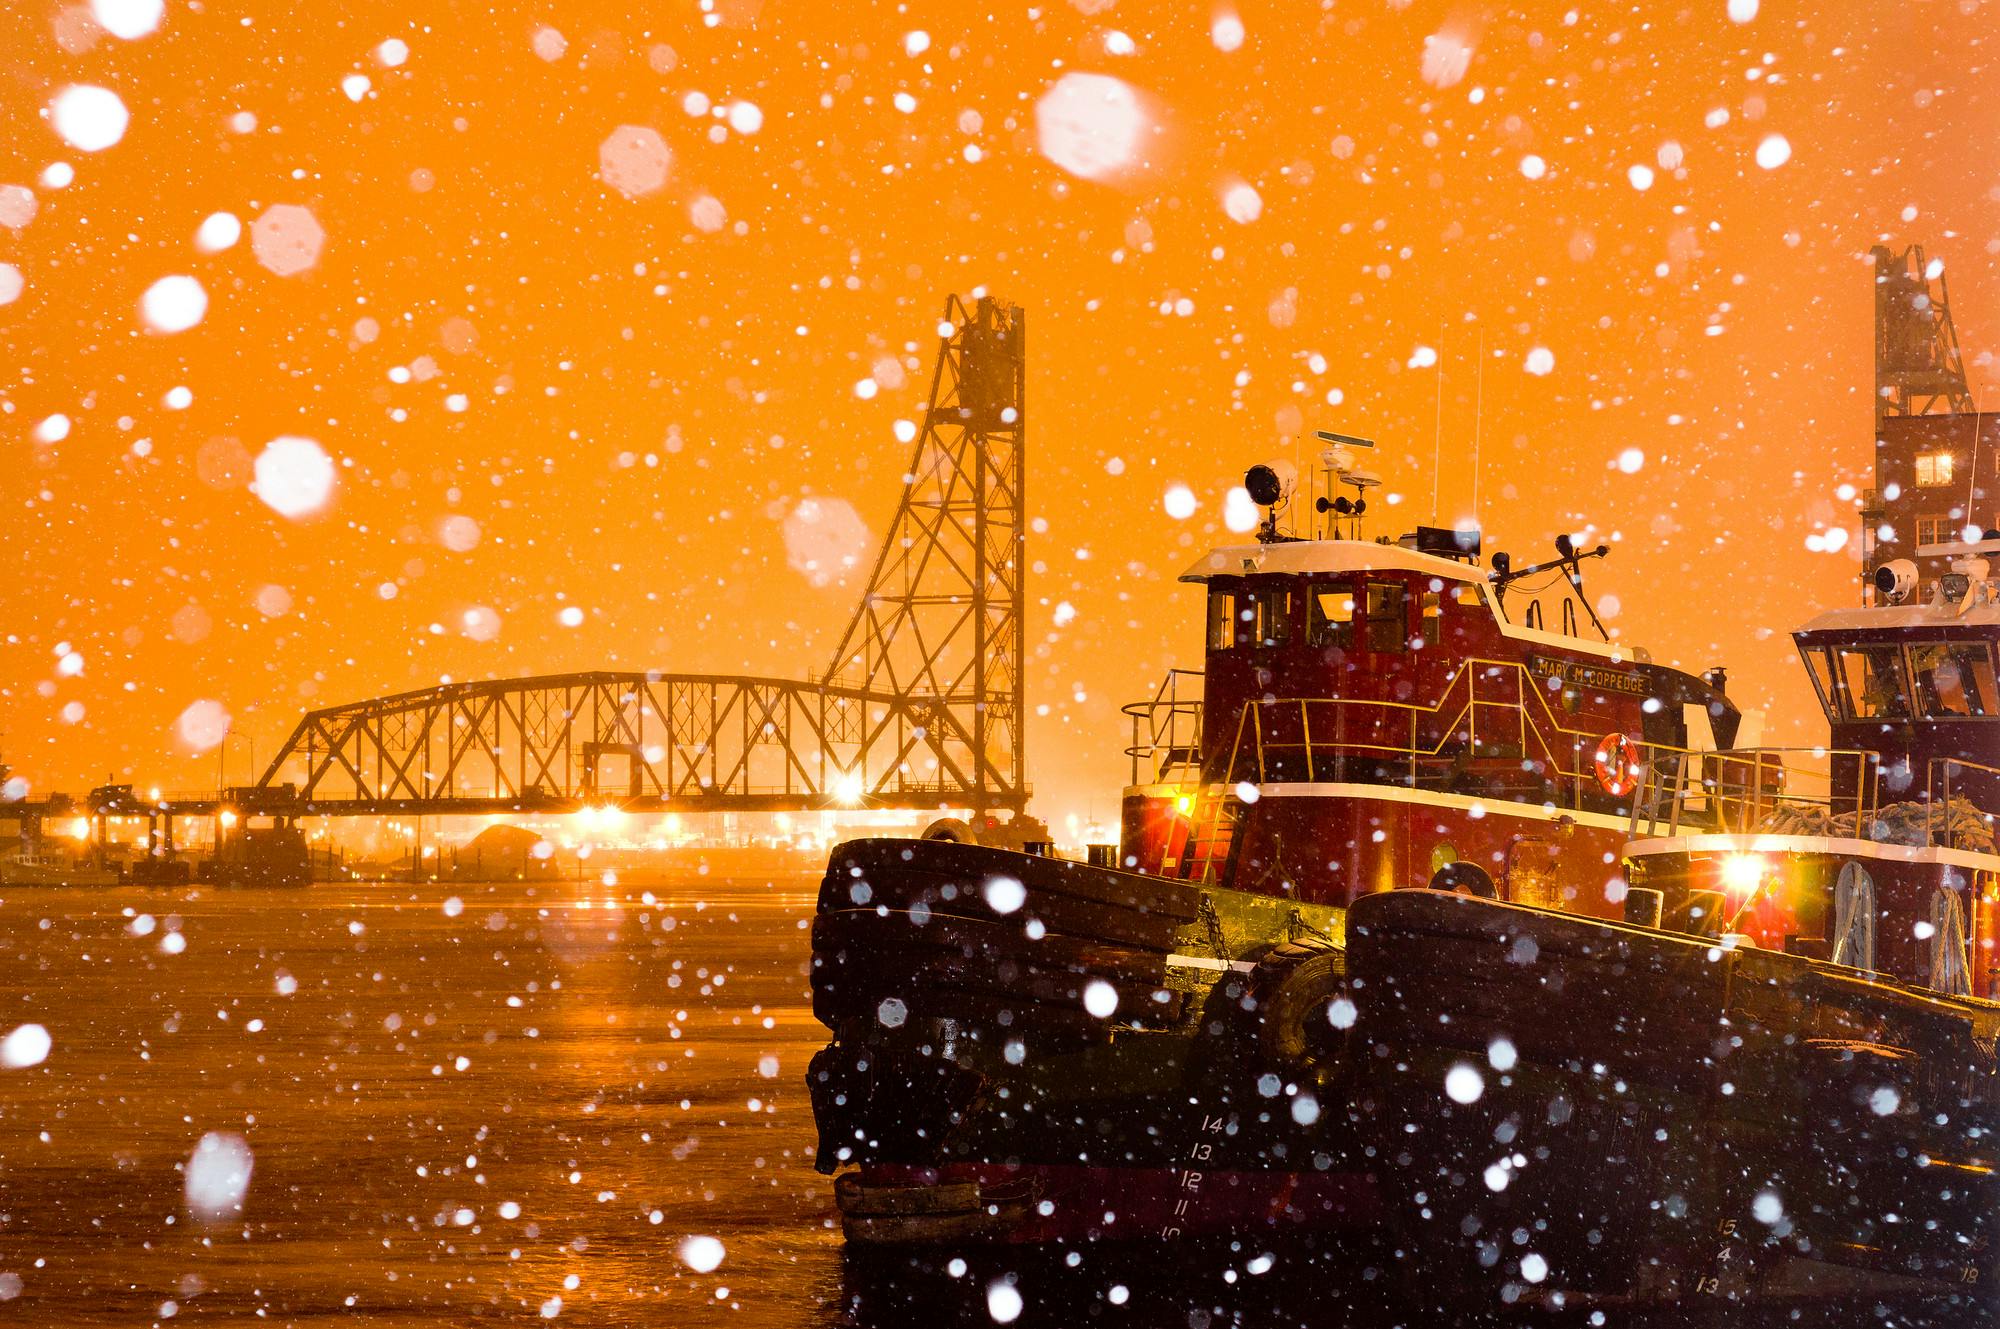 Tugboats in the Snow